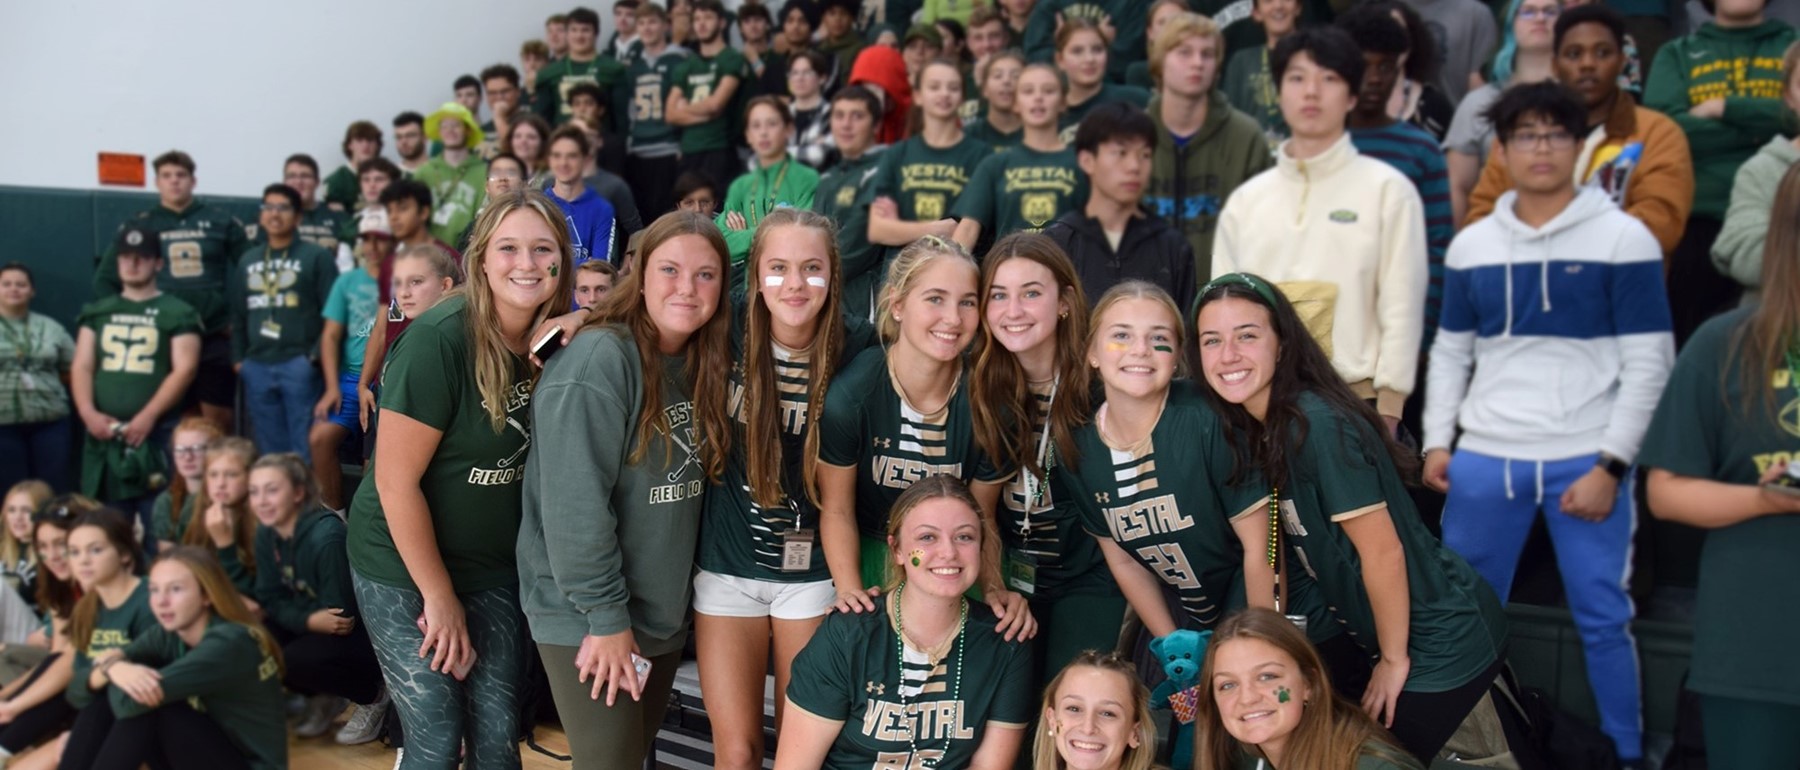 Vestal High School juniors dressed in green celebrate during the Fall 2022 Pep Rally in the gym.